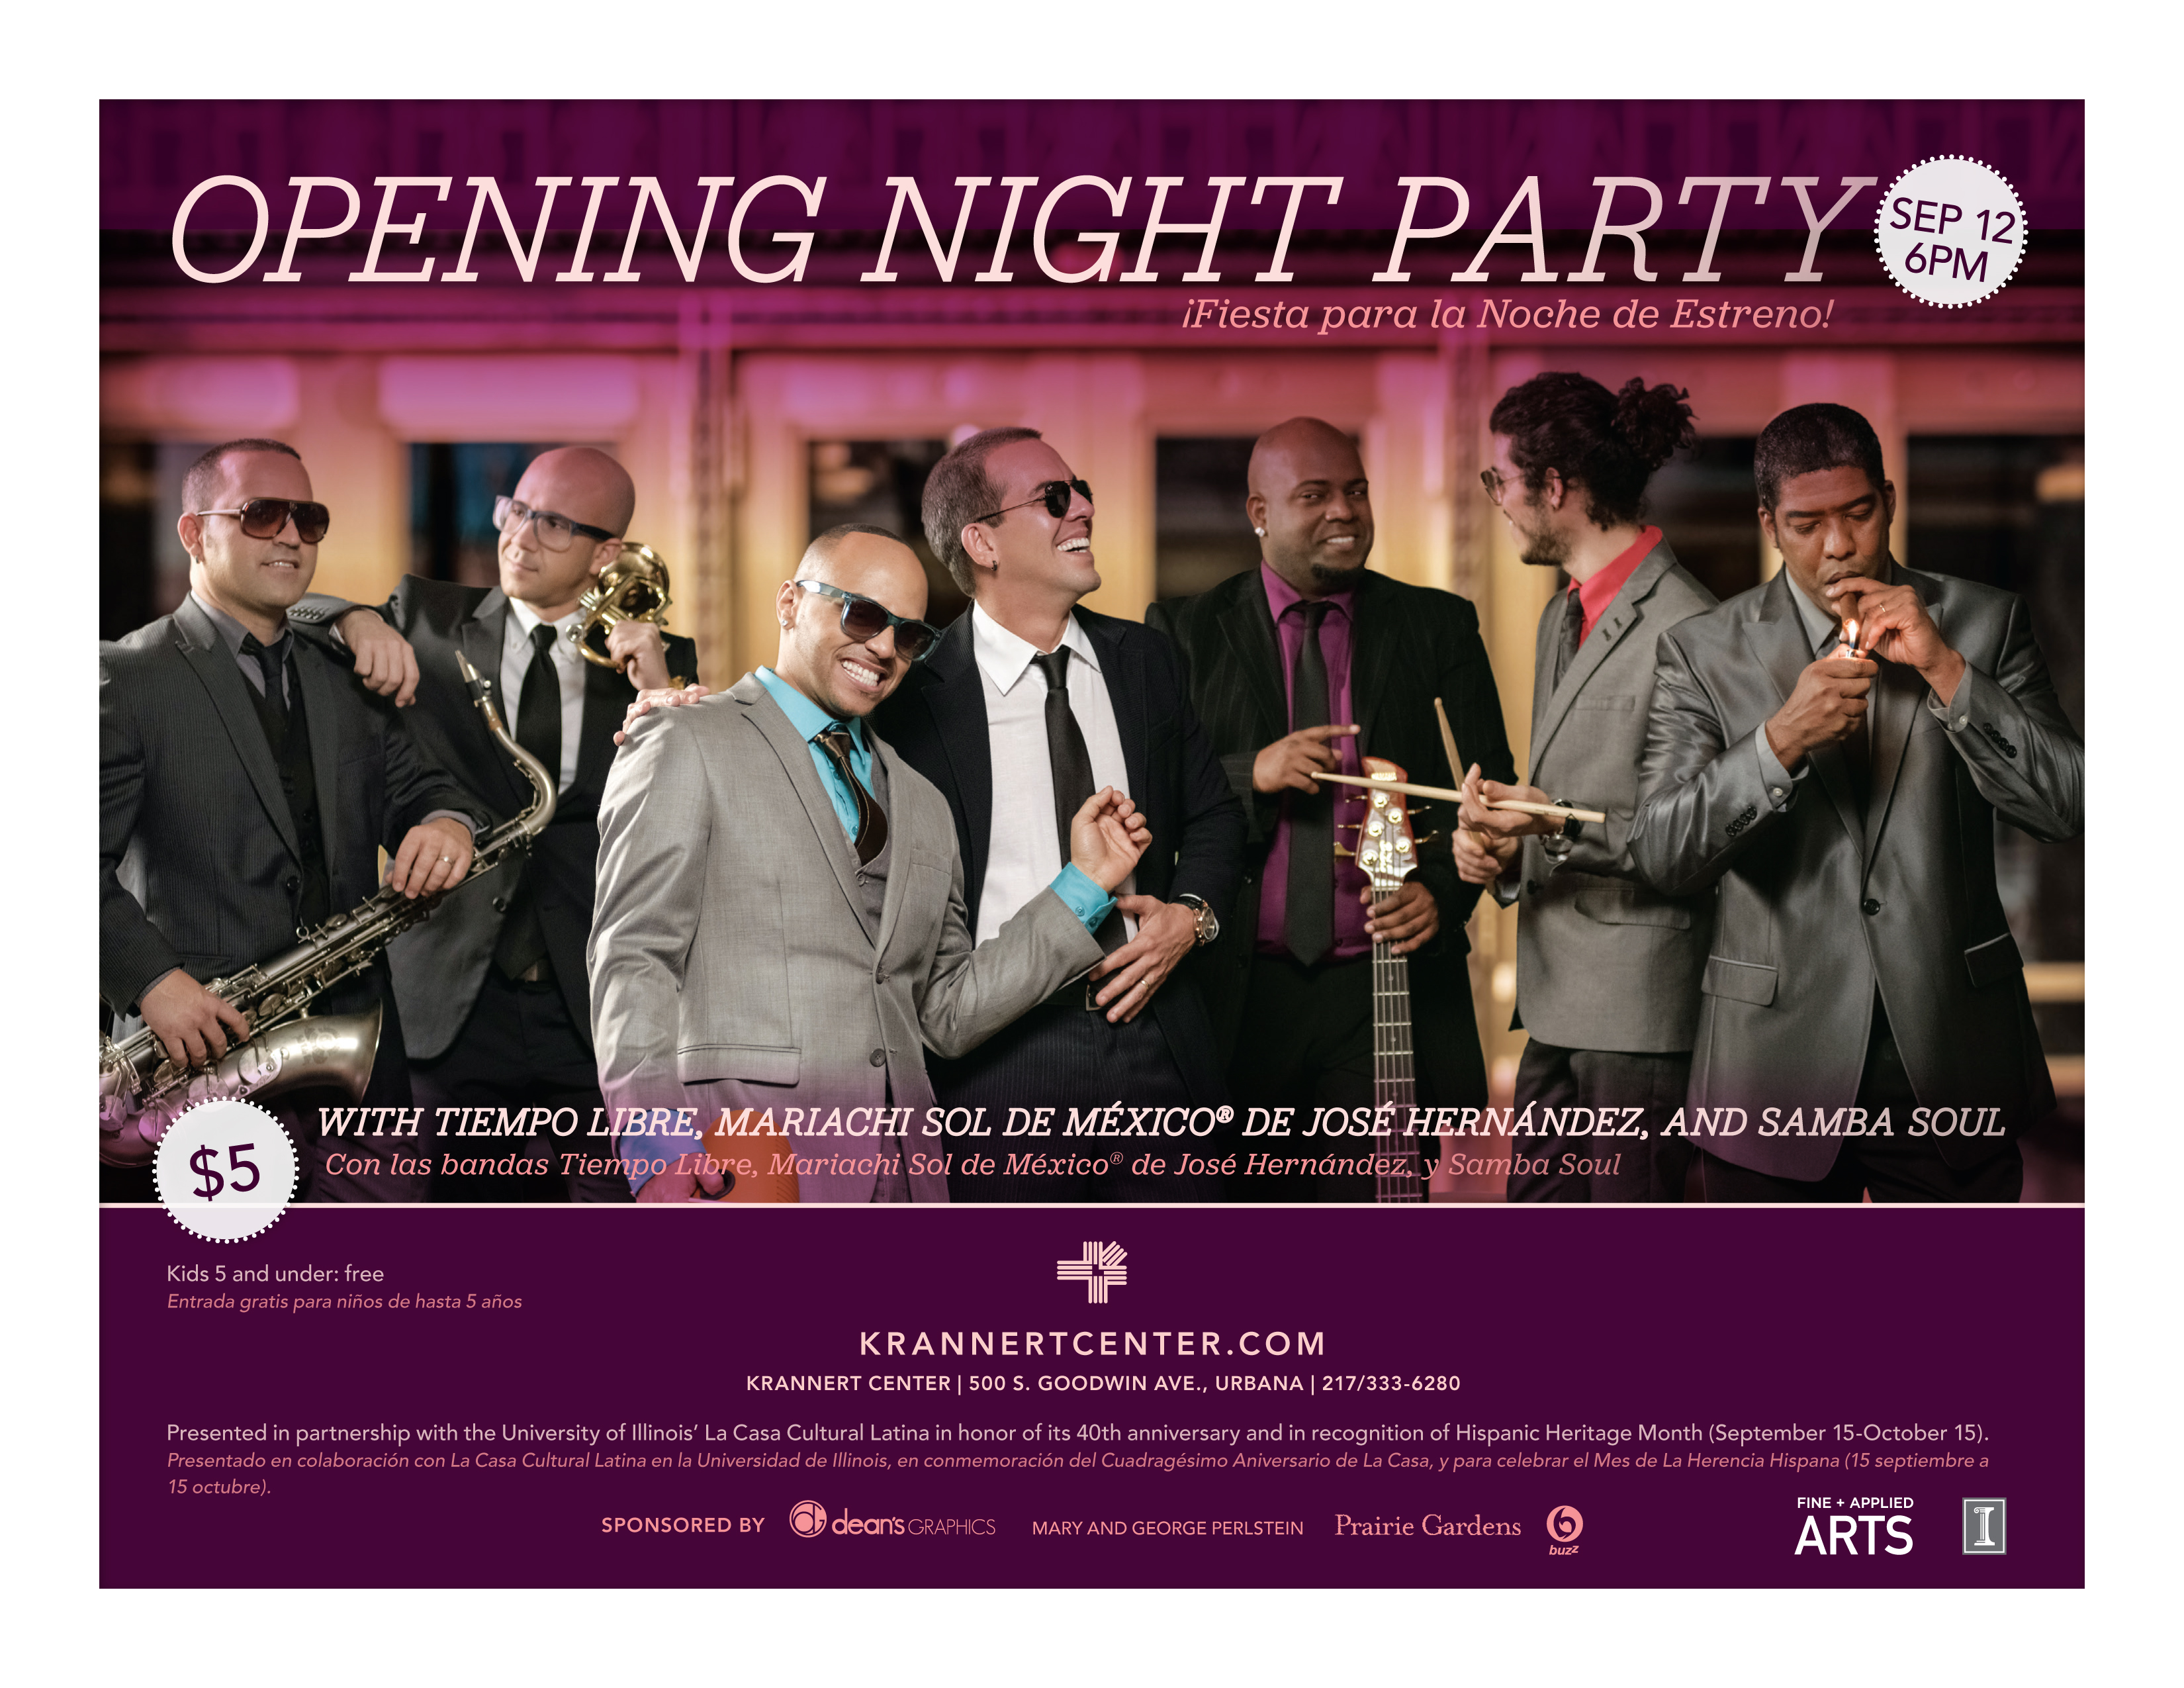 Krannert Opening Night flyer- a group of musicians standing together